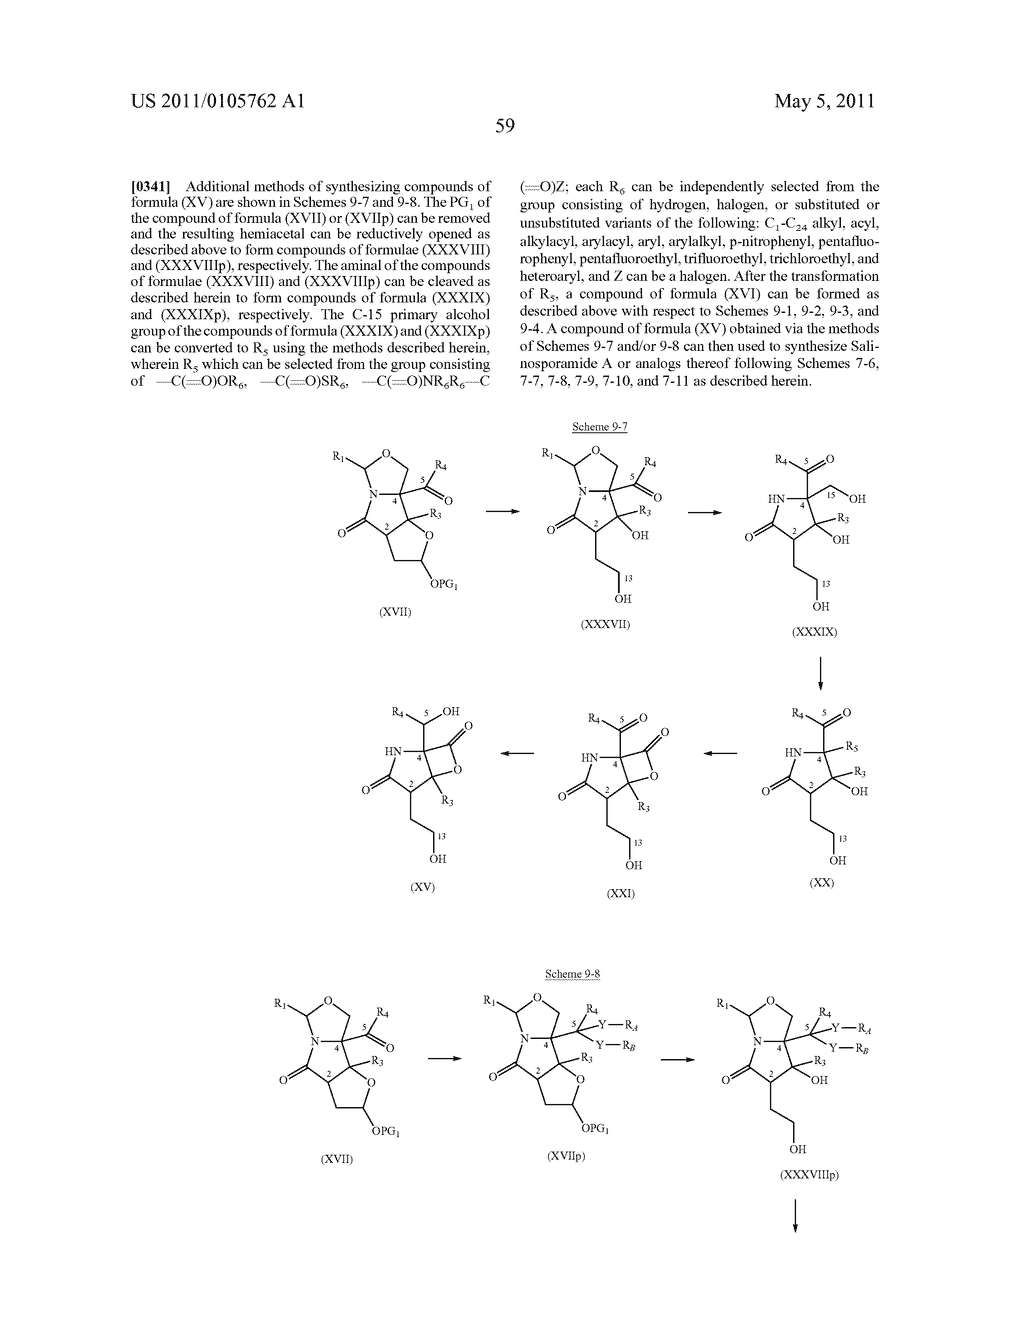 TOTAL SYNTHESIS OF SALINOSPORAMIDE A AND ANALOGS THEREOF - diagram, schematic, and image 124